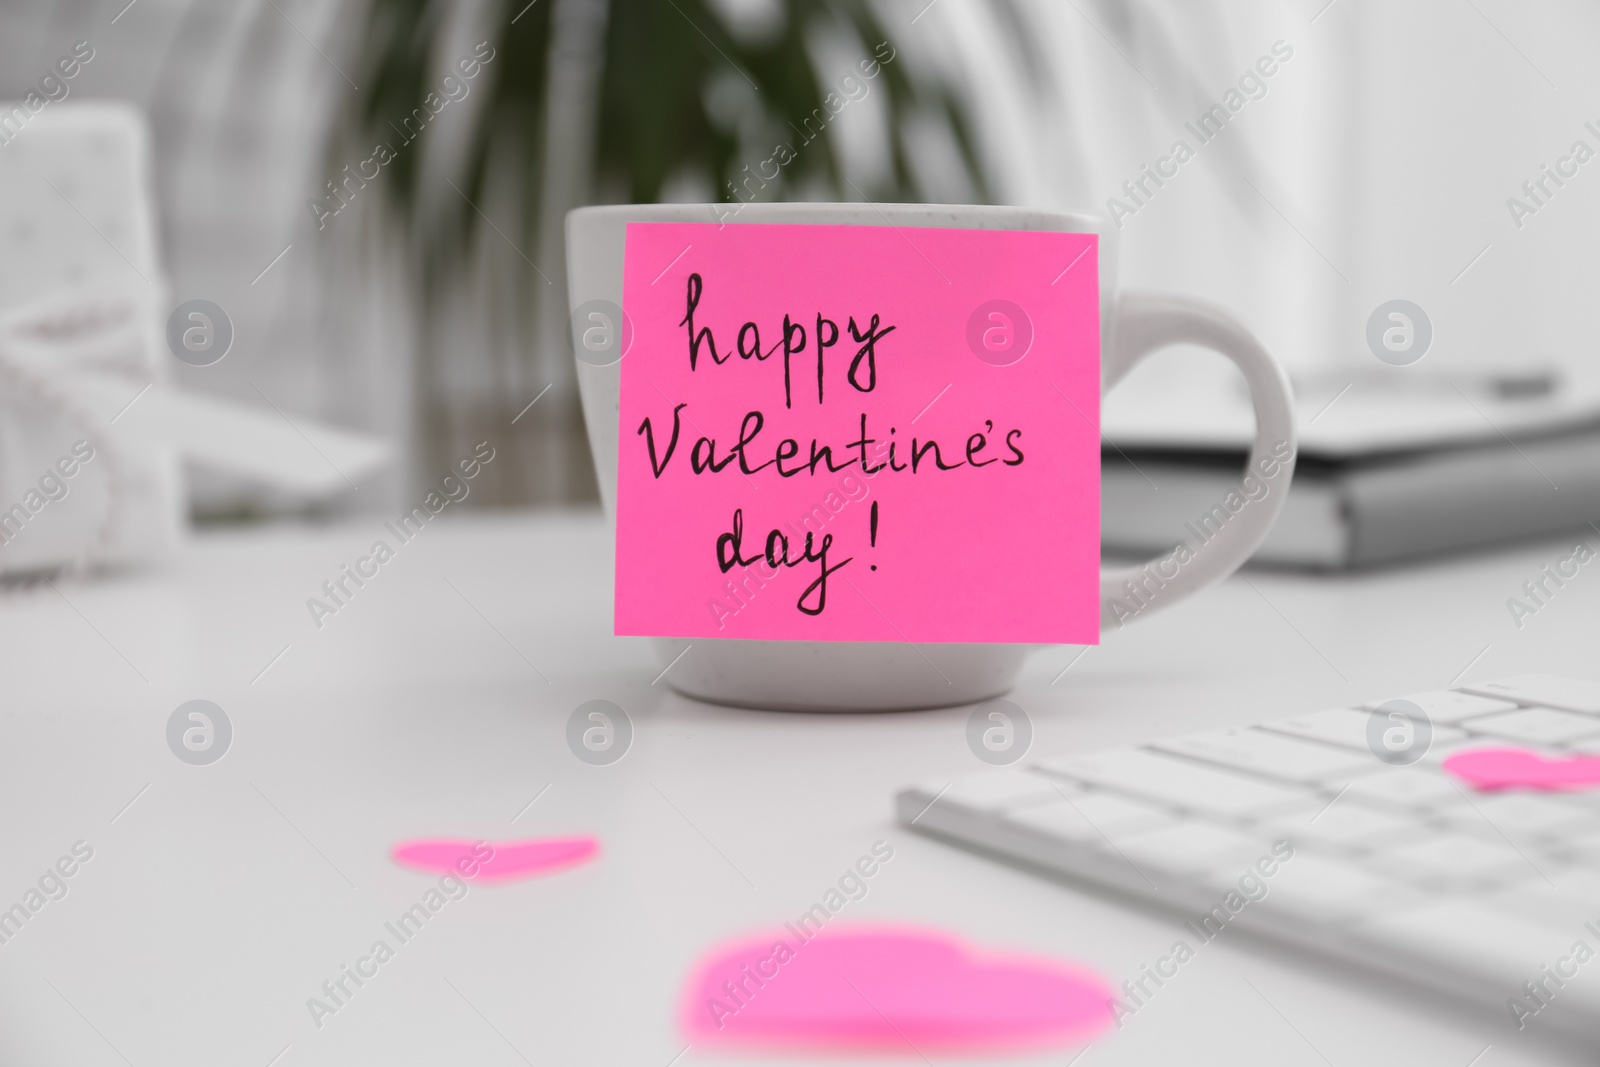 Photo of Memory sticker with phrase Happy Valentine's Day on cup at workplace